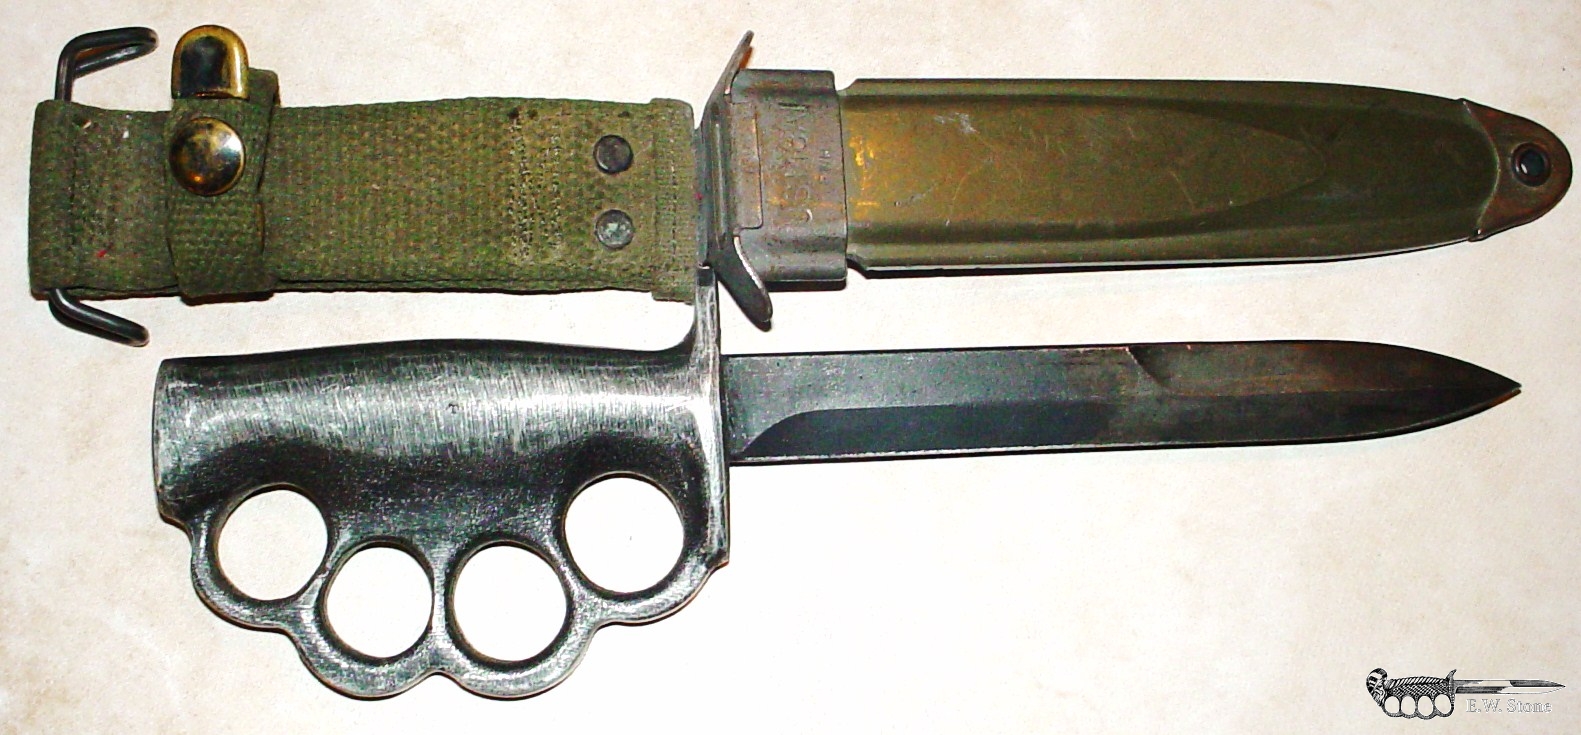 Parsons Knuckle Knife